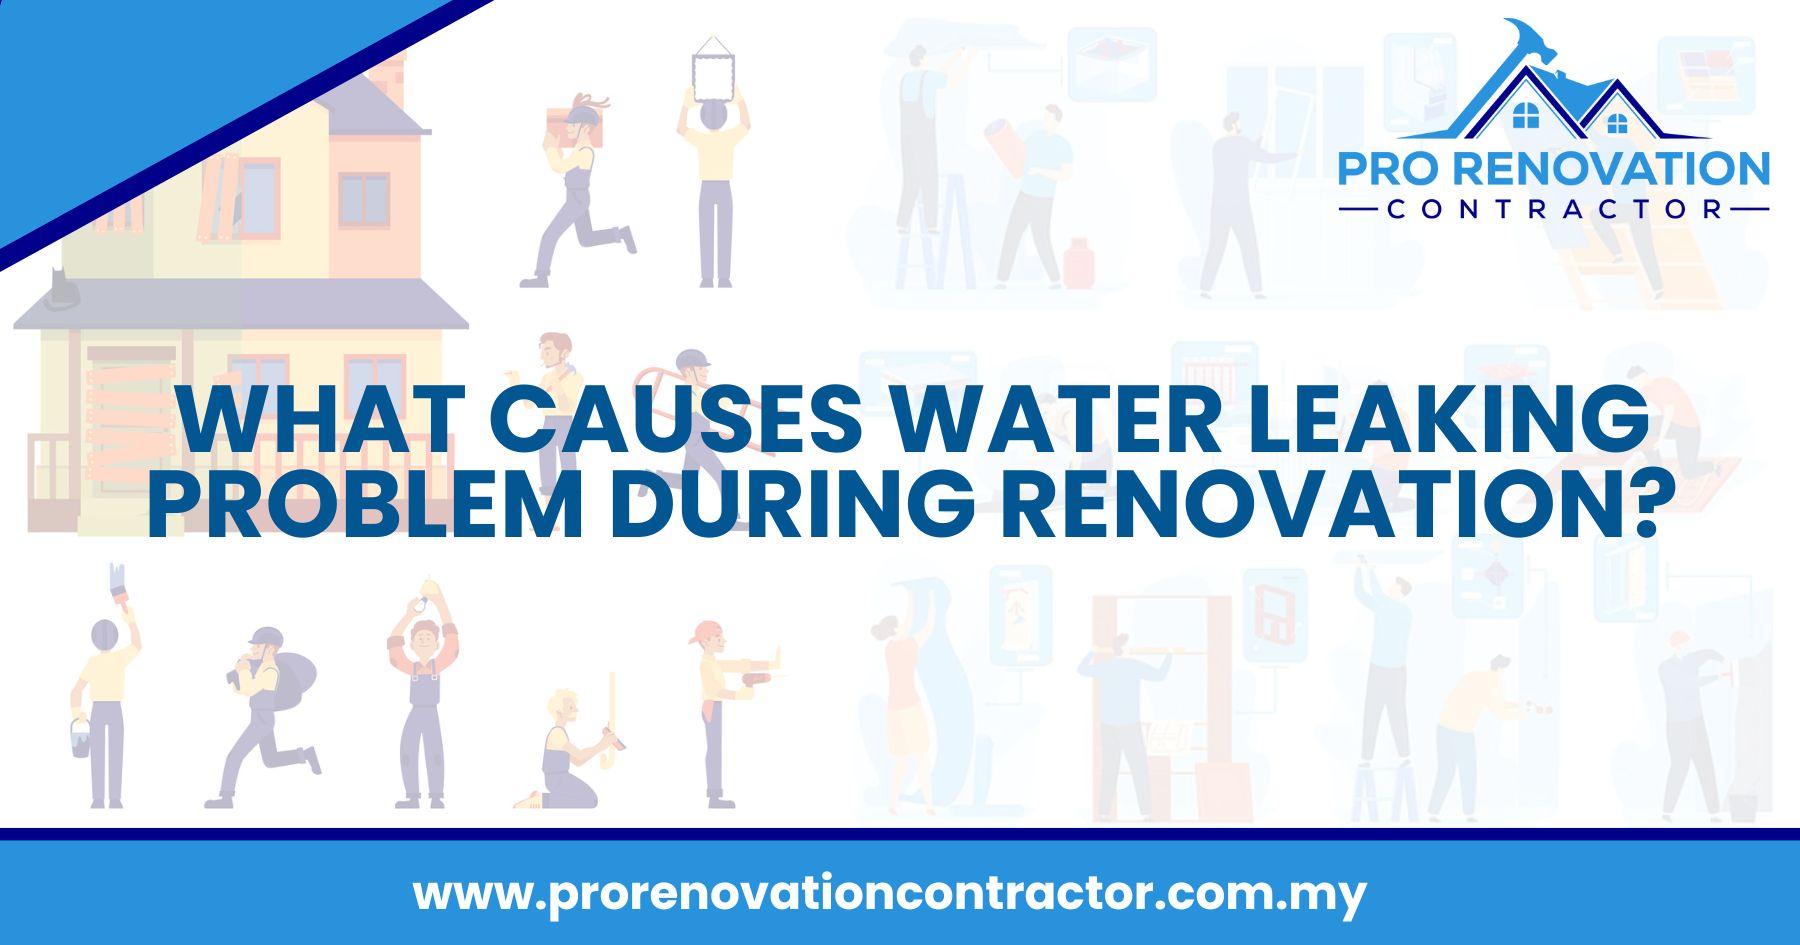 What Causes Water Leaking Problem During Renovation